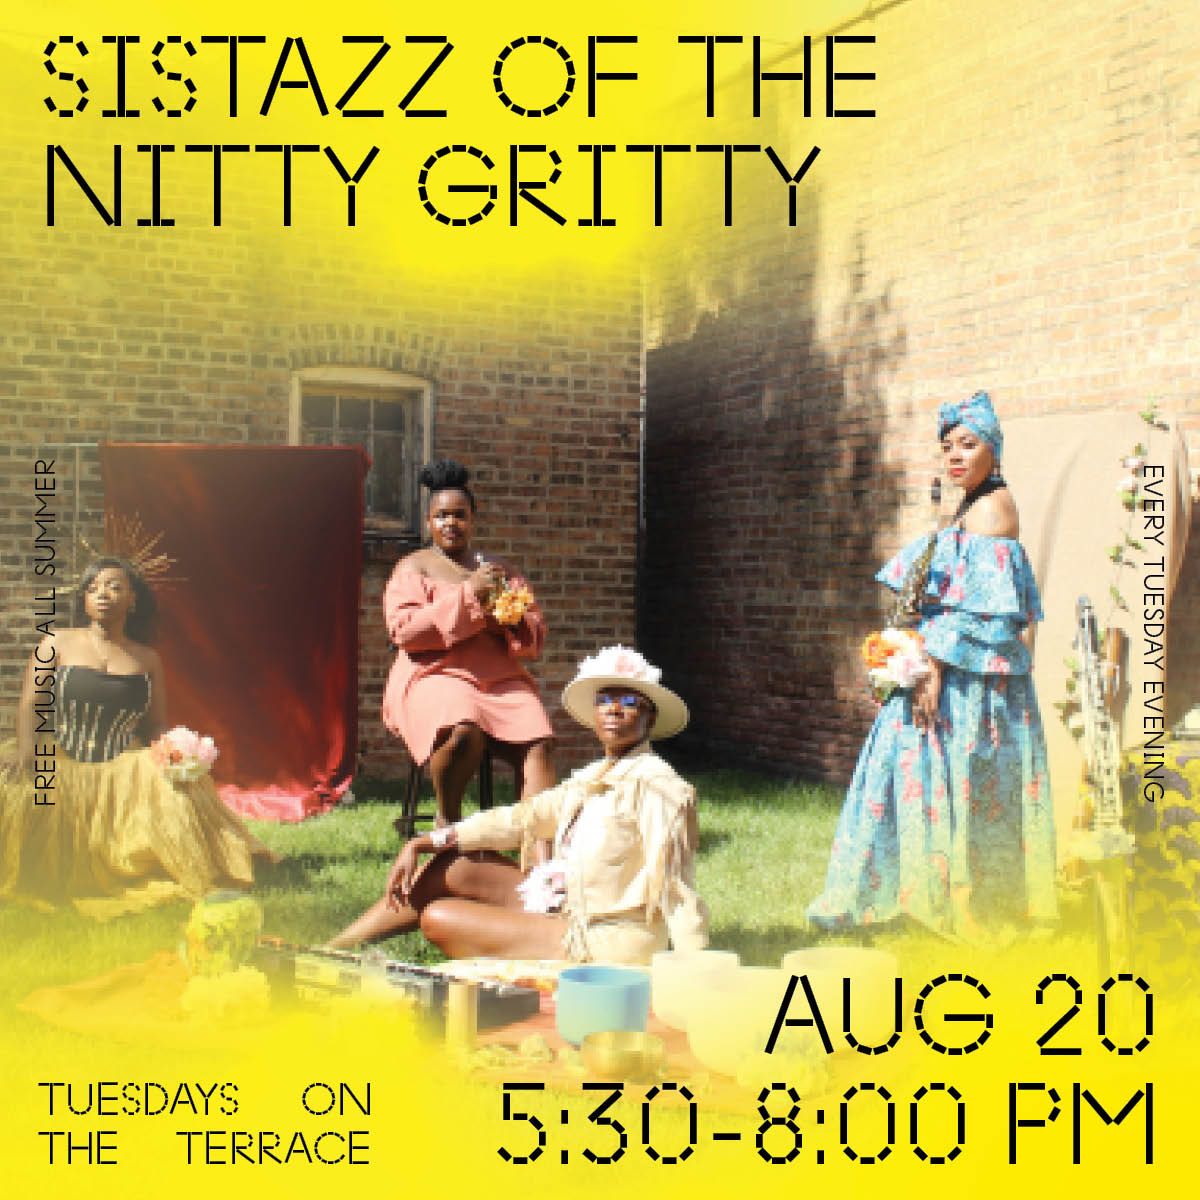 Tuesdays on the Terrace | Sistazz of The Nitty Gritty